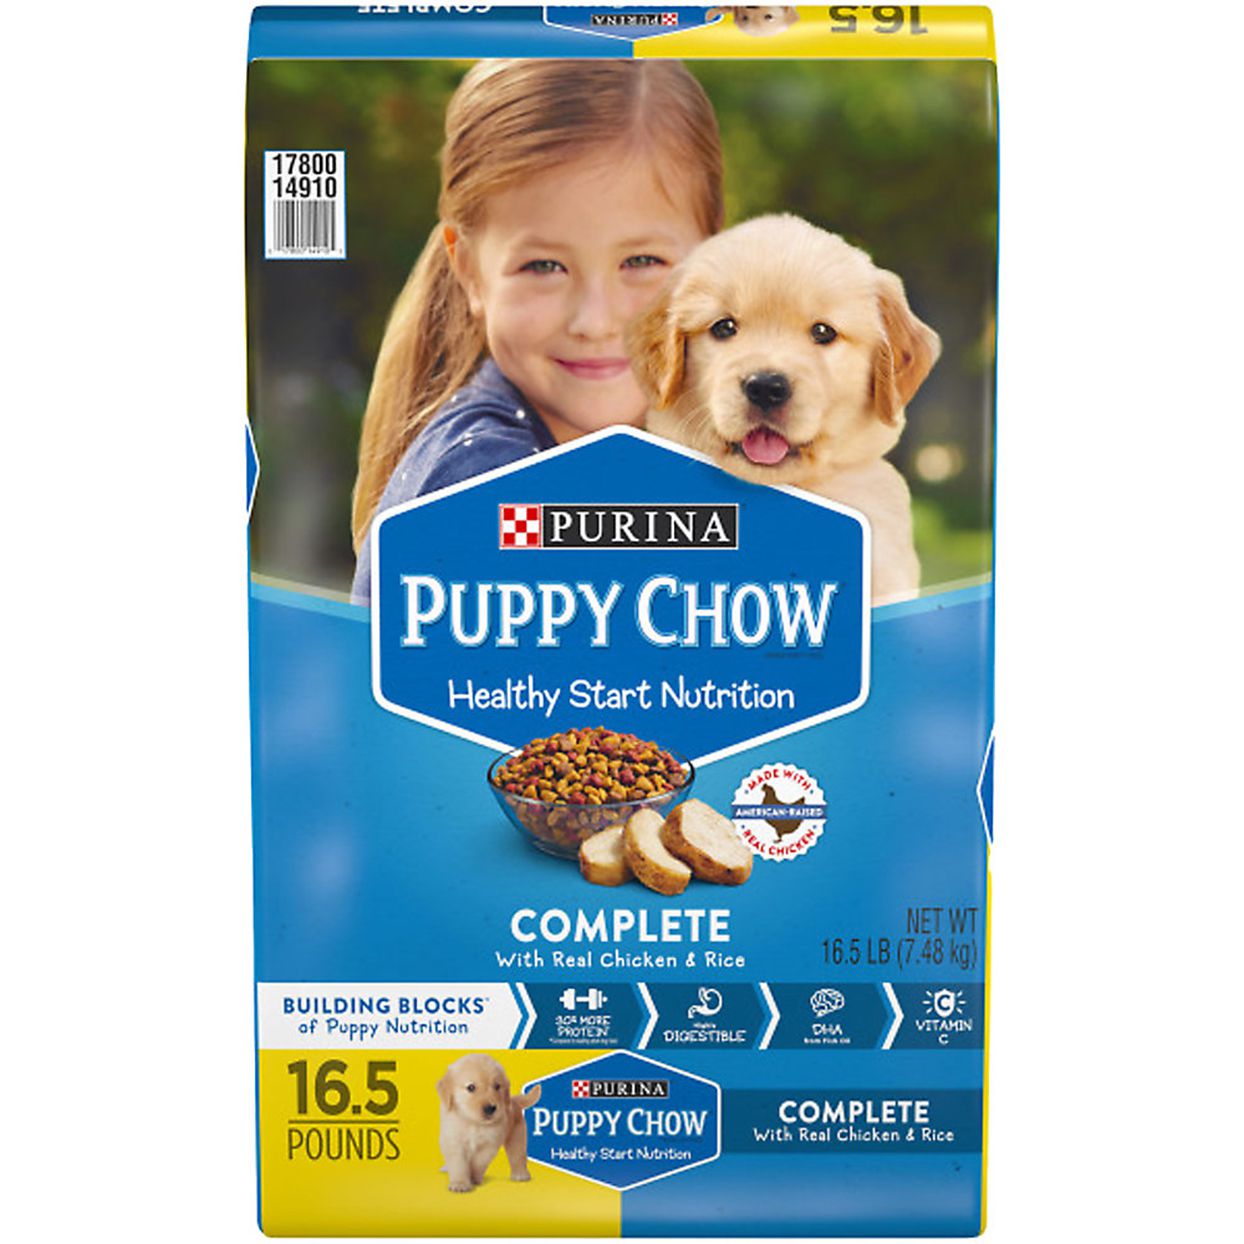 Purina Puppy Chow Complete With Chicken & Rice Dry Dog Food